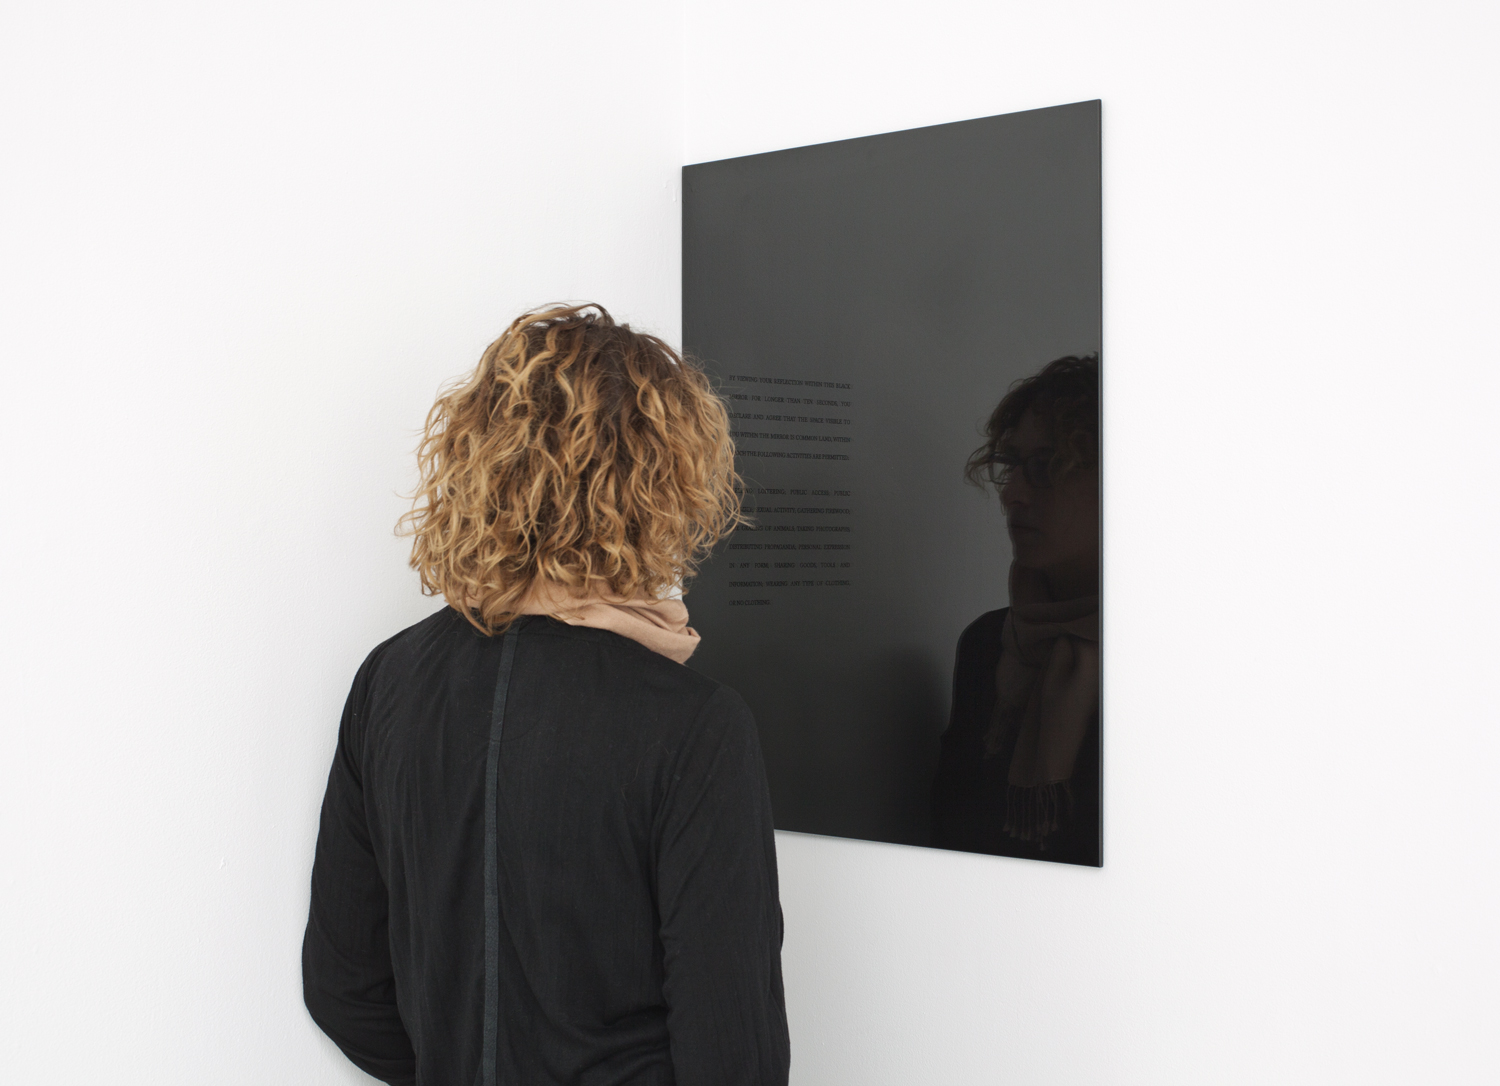  Carey Young,&nbsp;2010, Obsidian Contract, &nbsp;vinyl text and black mirror. First exhibited at Paula Cooper Gallery, New York 